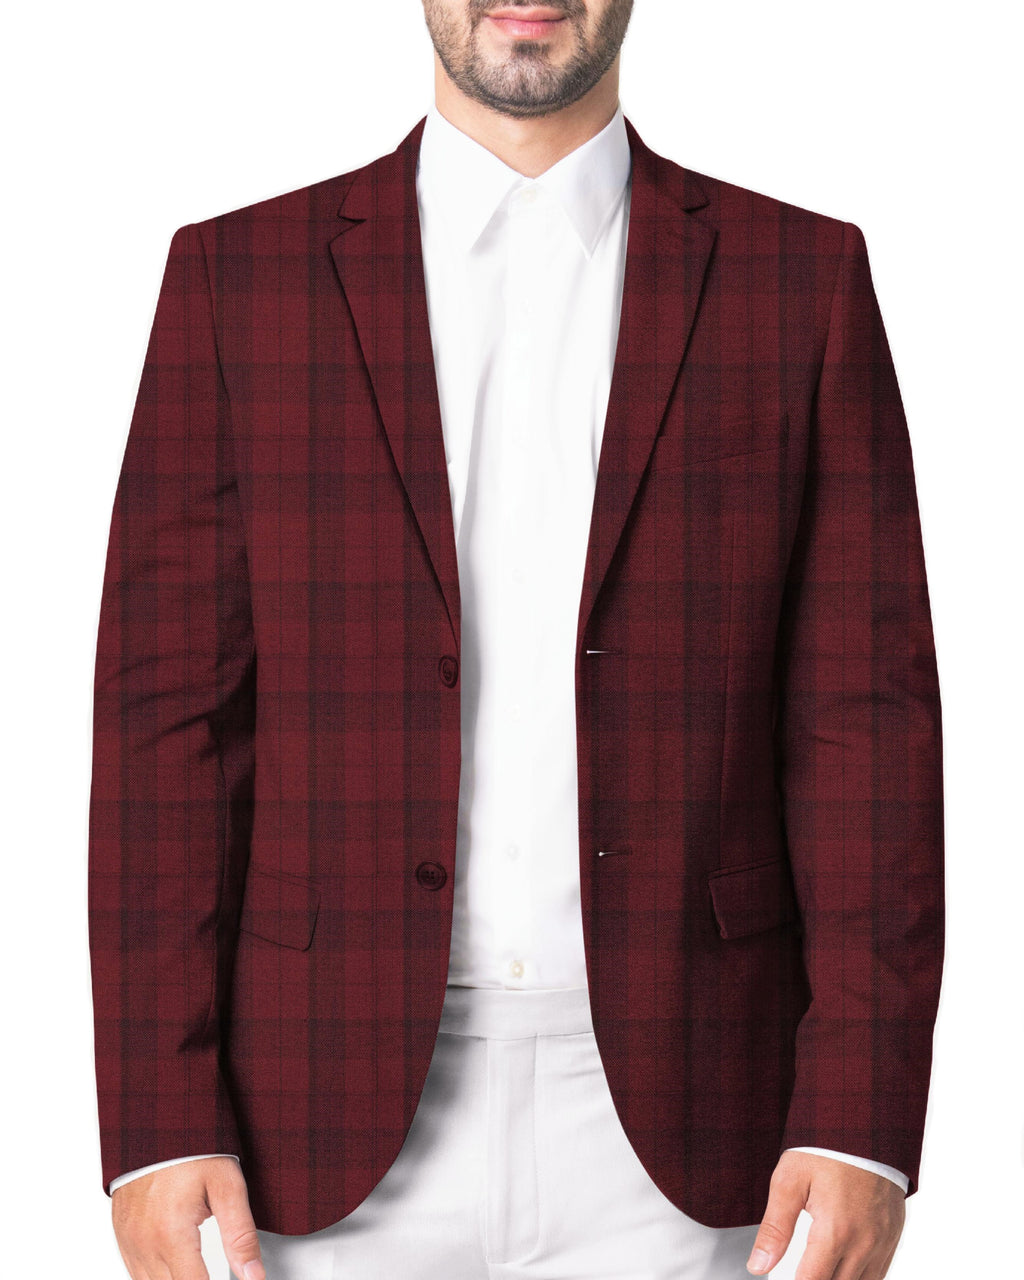 Blood Red with Shadow Black Checkered Suit - III